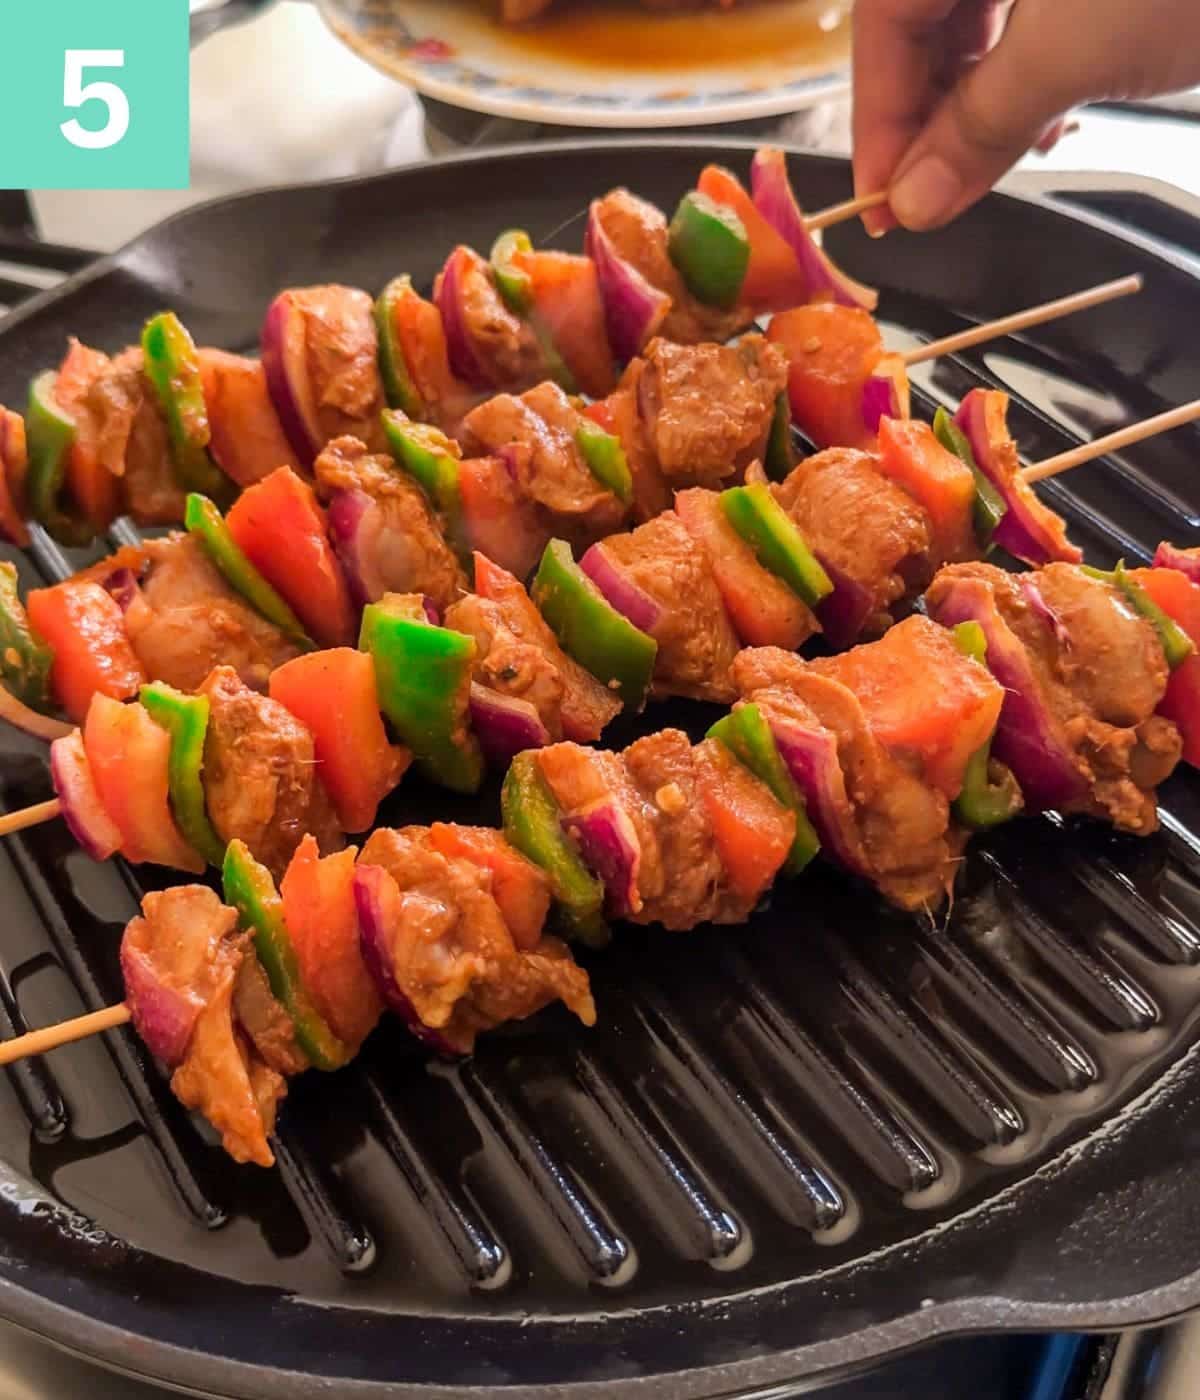 grilling chicken skewers on a grill pan.